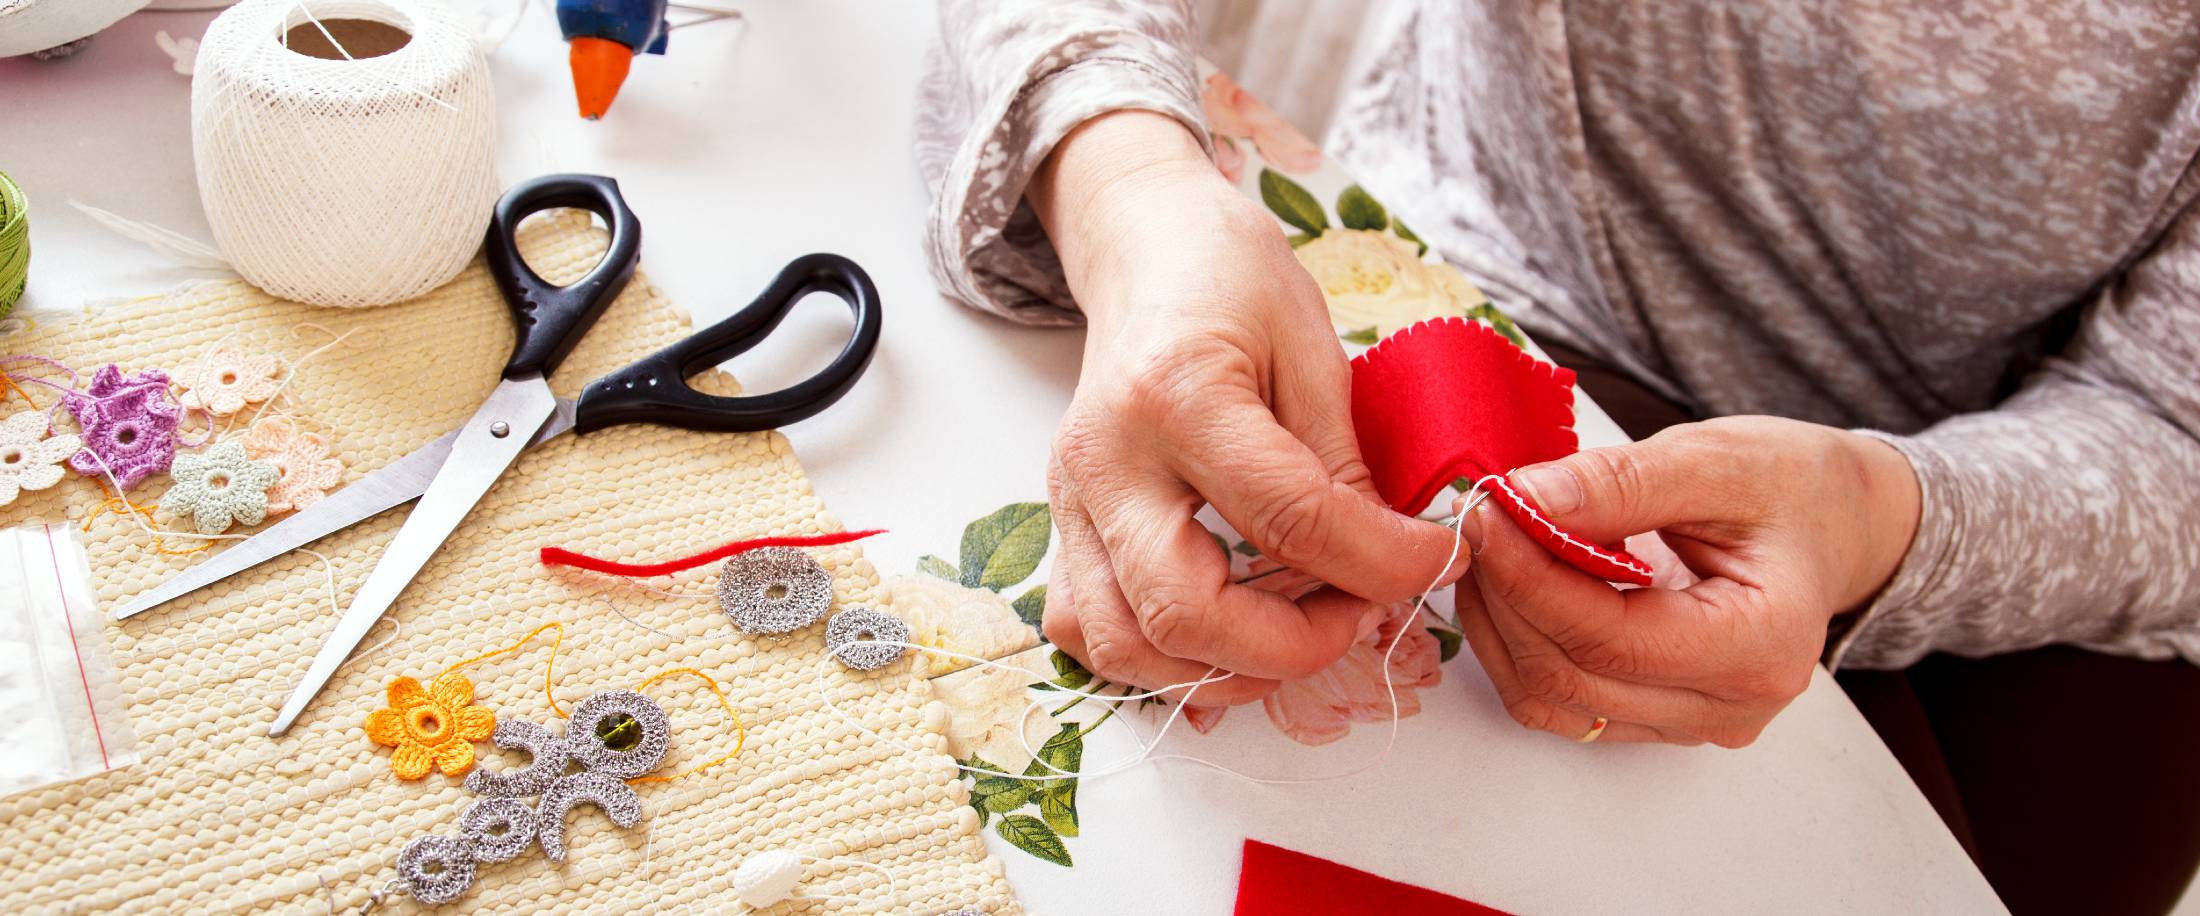 5 Easy Crafts For Seniors With Dementia - Desert Winds Retirement